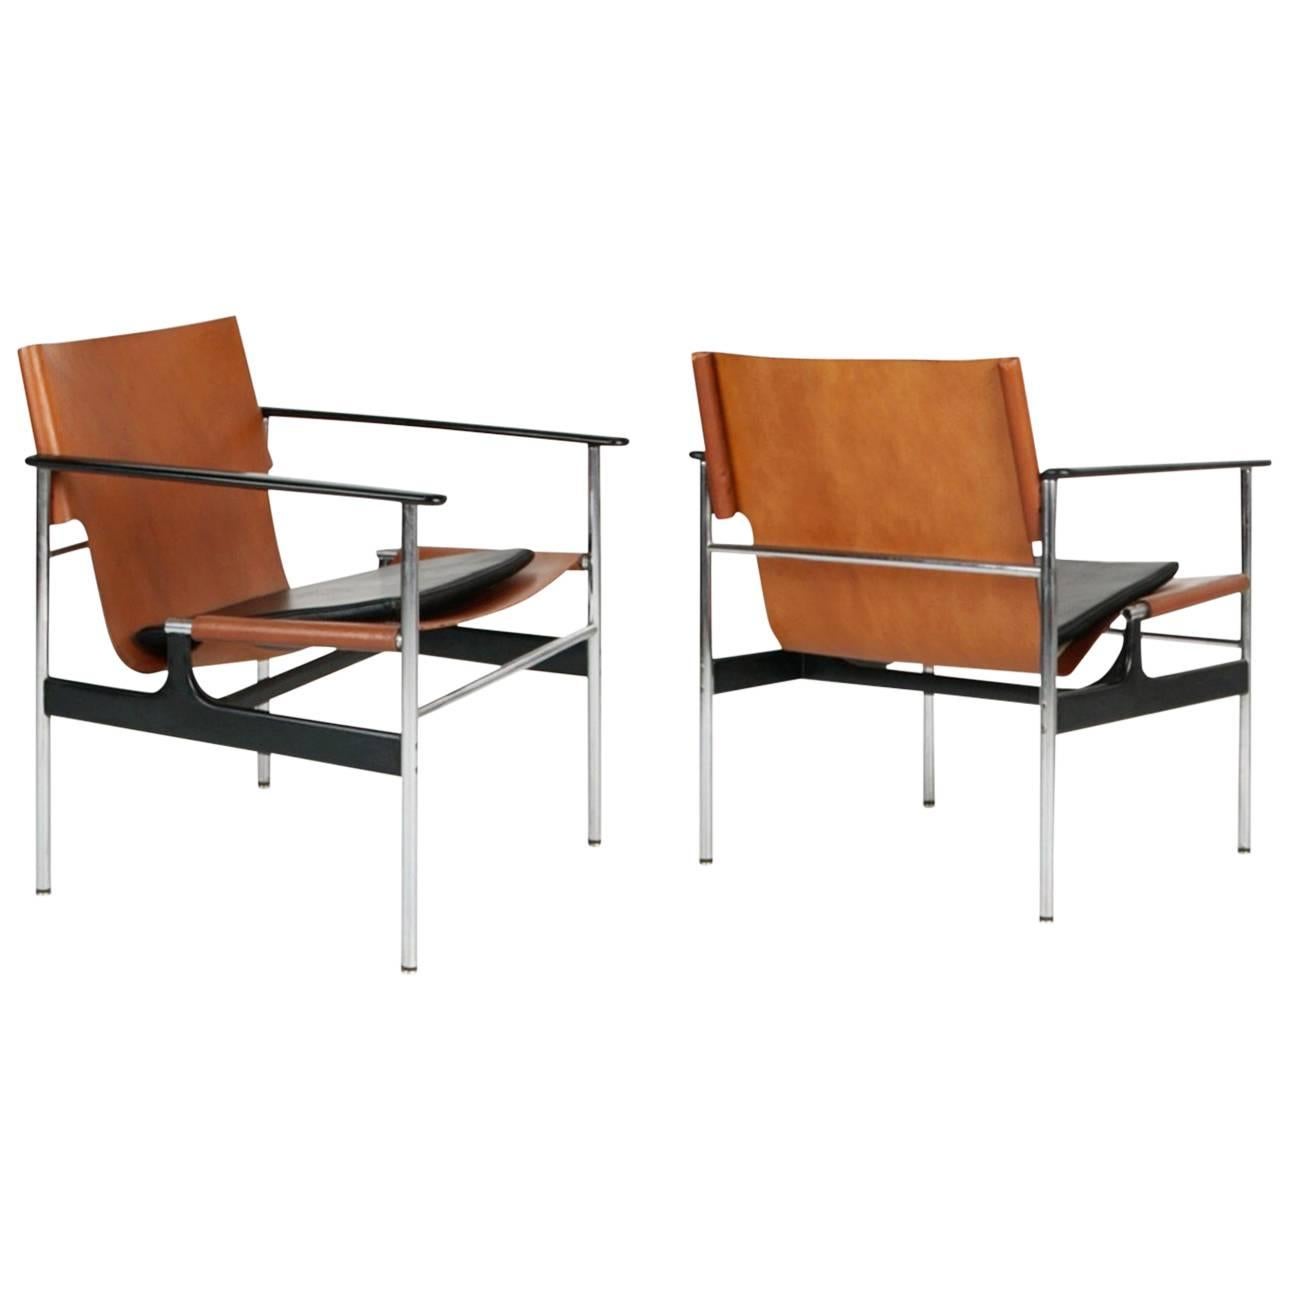 Early Production Model 657 Armchairs by Charles Pollock for Knoll Associates